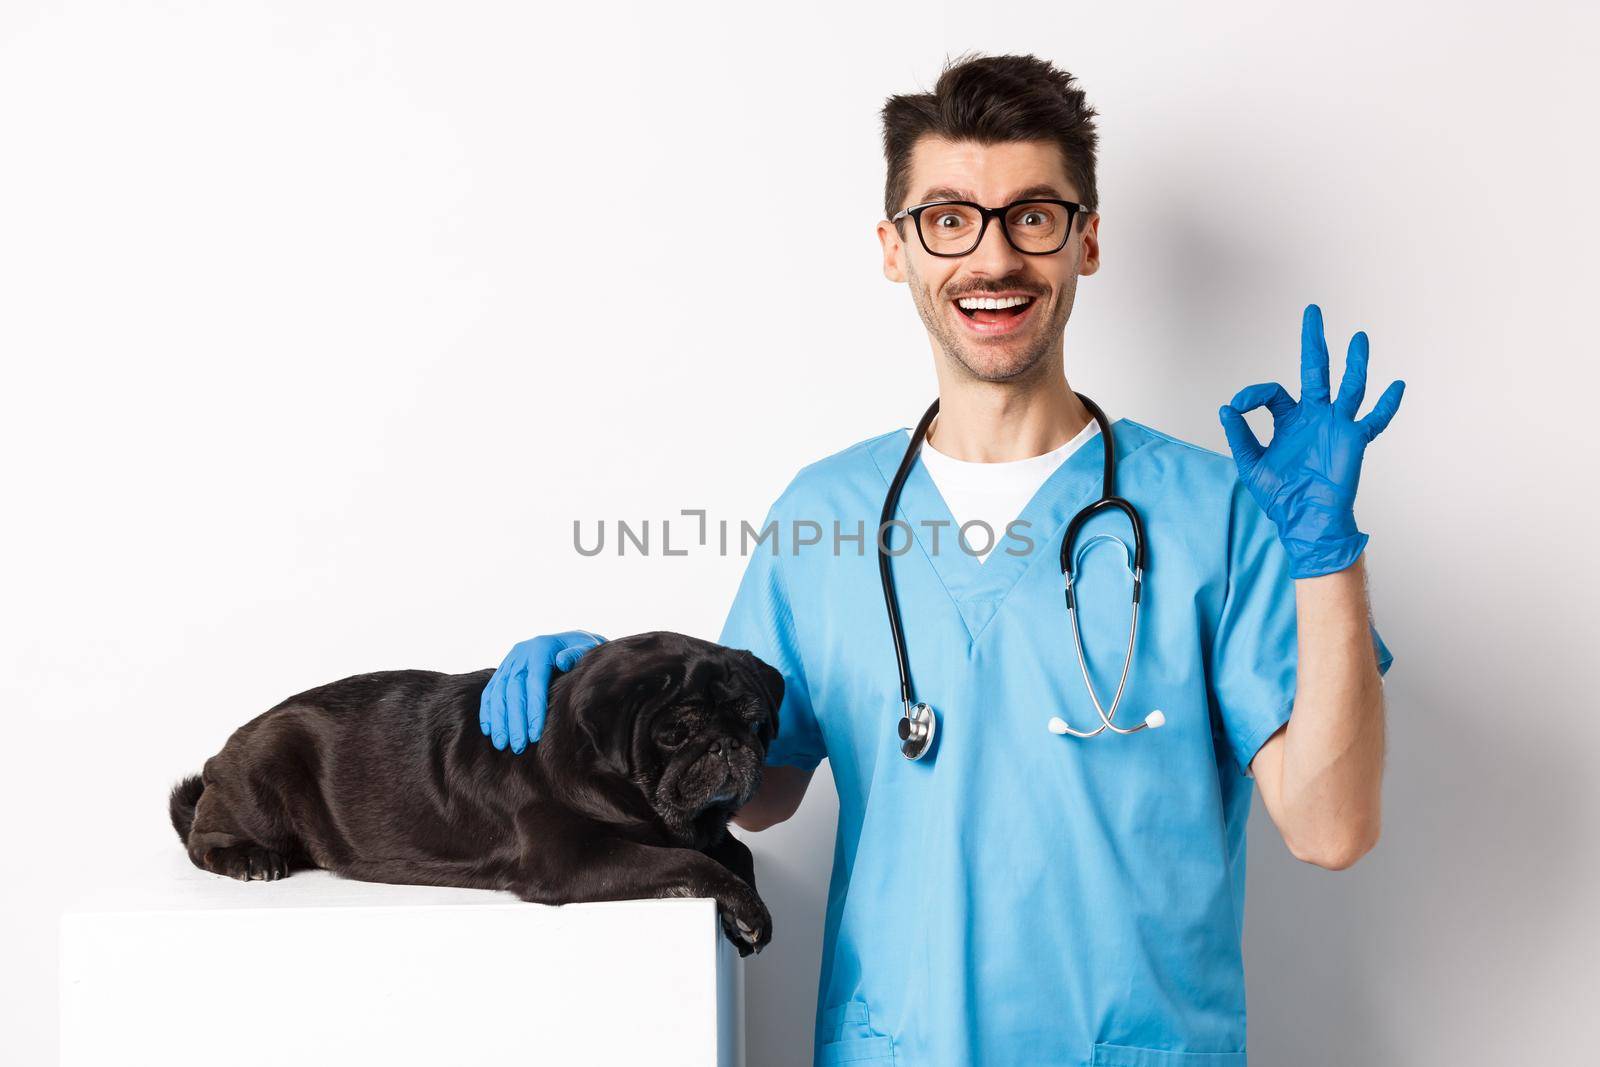 Happy male doctor veterinarian examining cute black dog pug, showing okay sign in approval, satisfied with animal health, standing over white background.